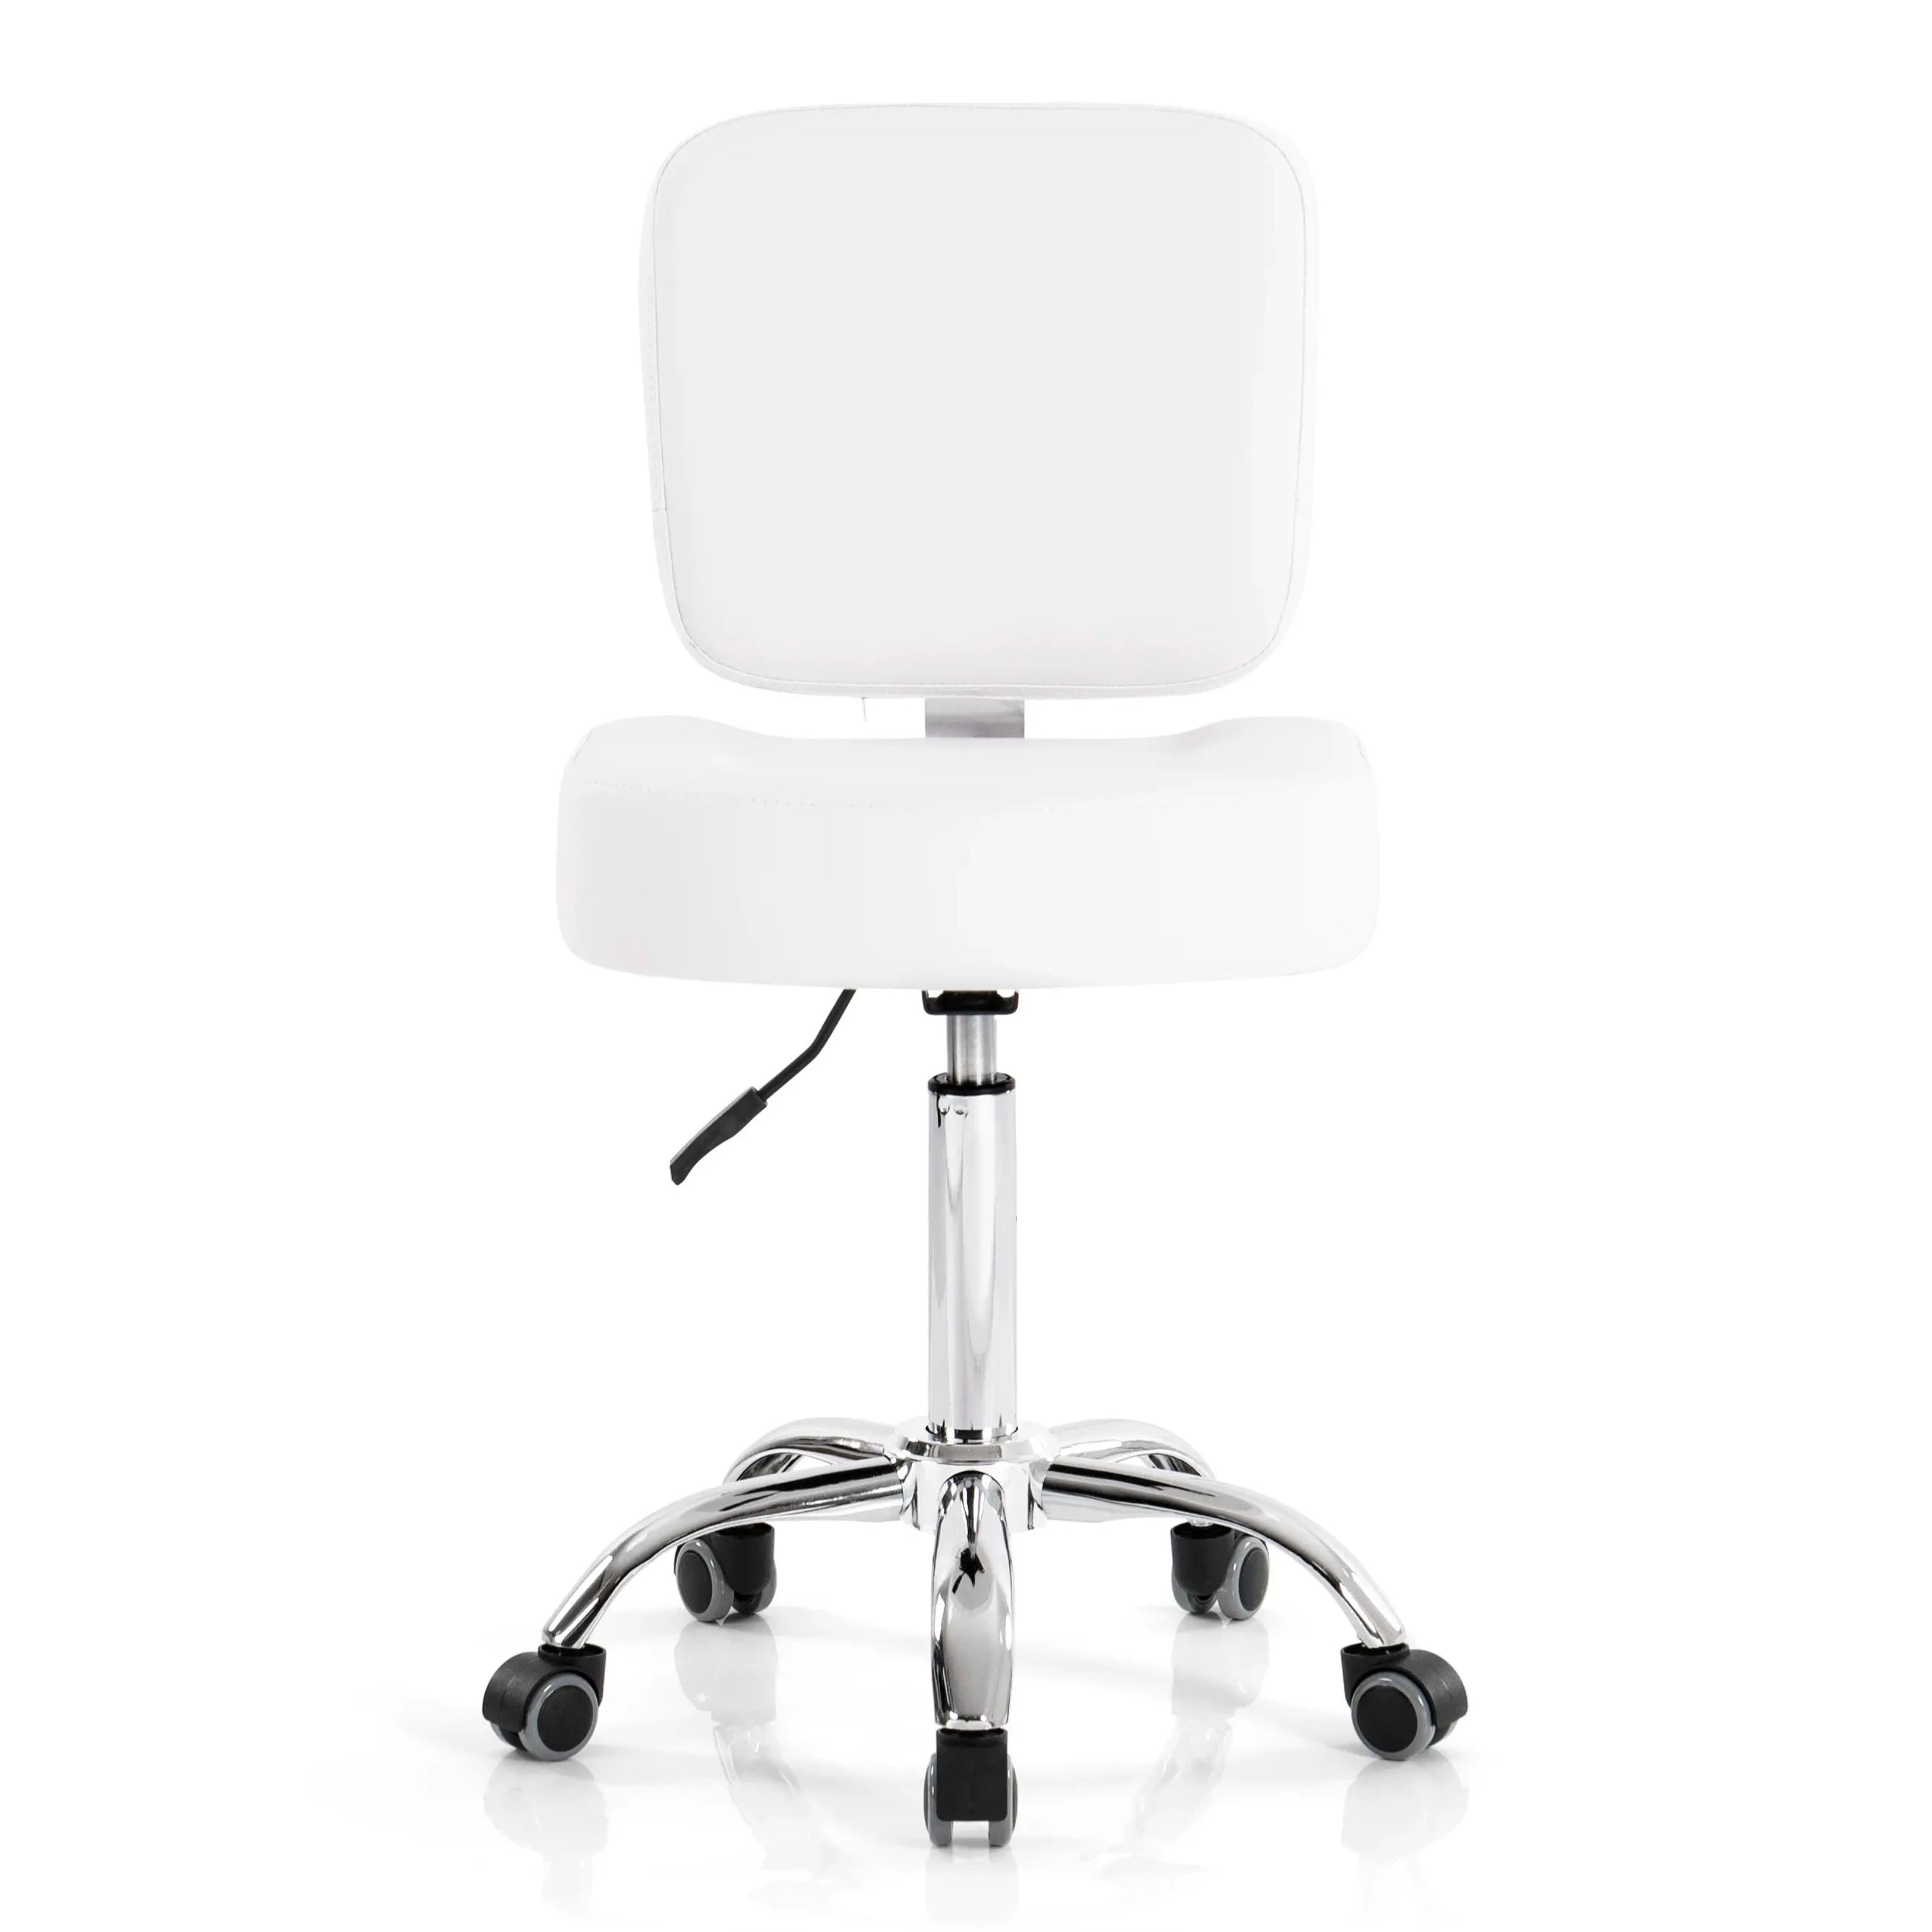 Ola Esthetician Chair Swiveling With Backrest white color 